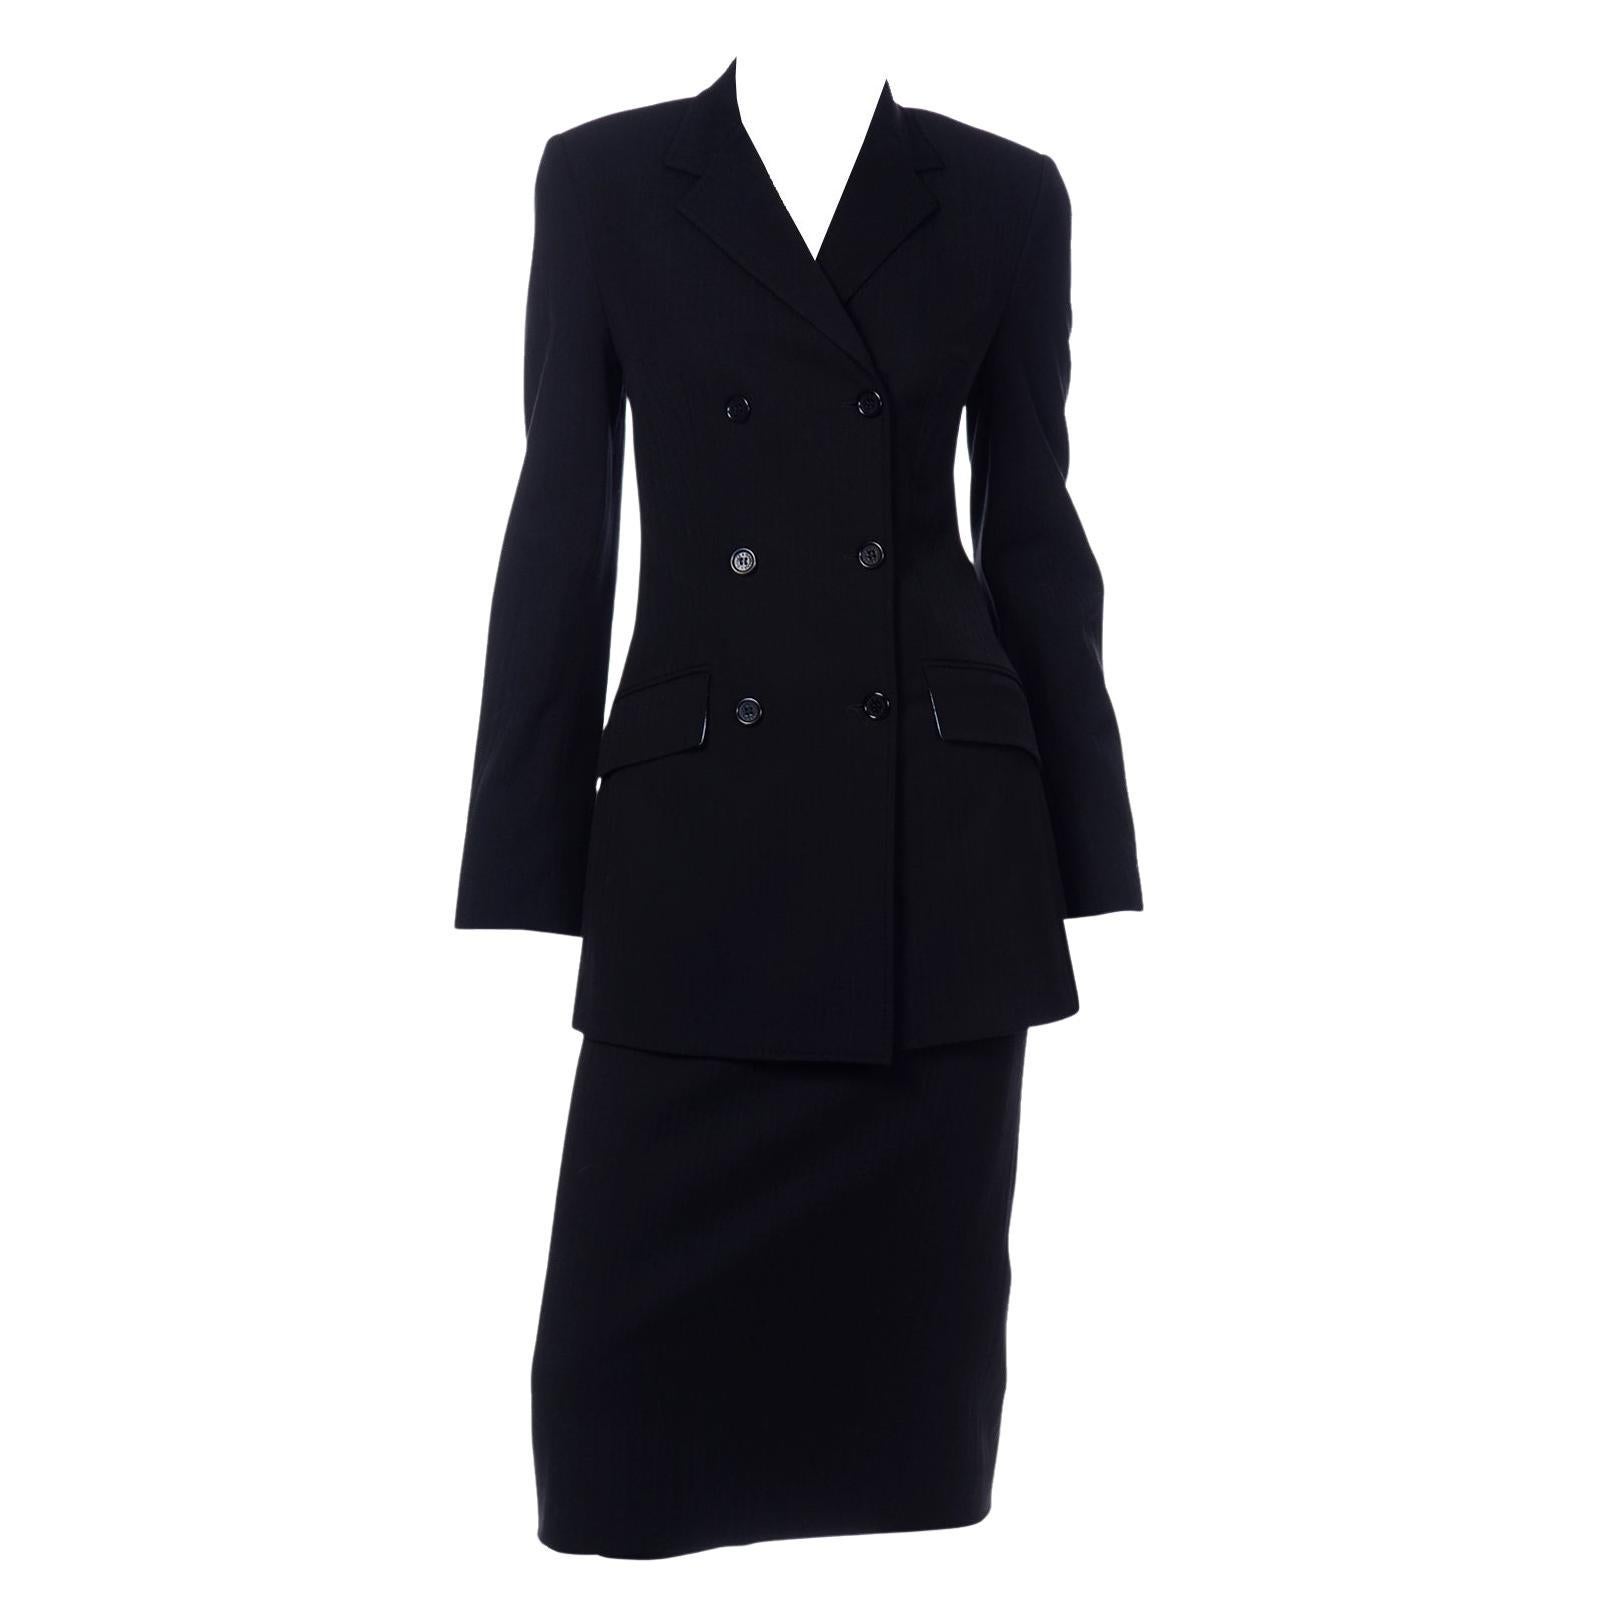 Vintage Dolce Gabbana Black Double Breasted Jacket and Skirt Suit